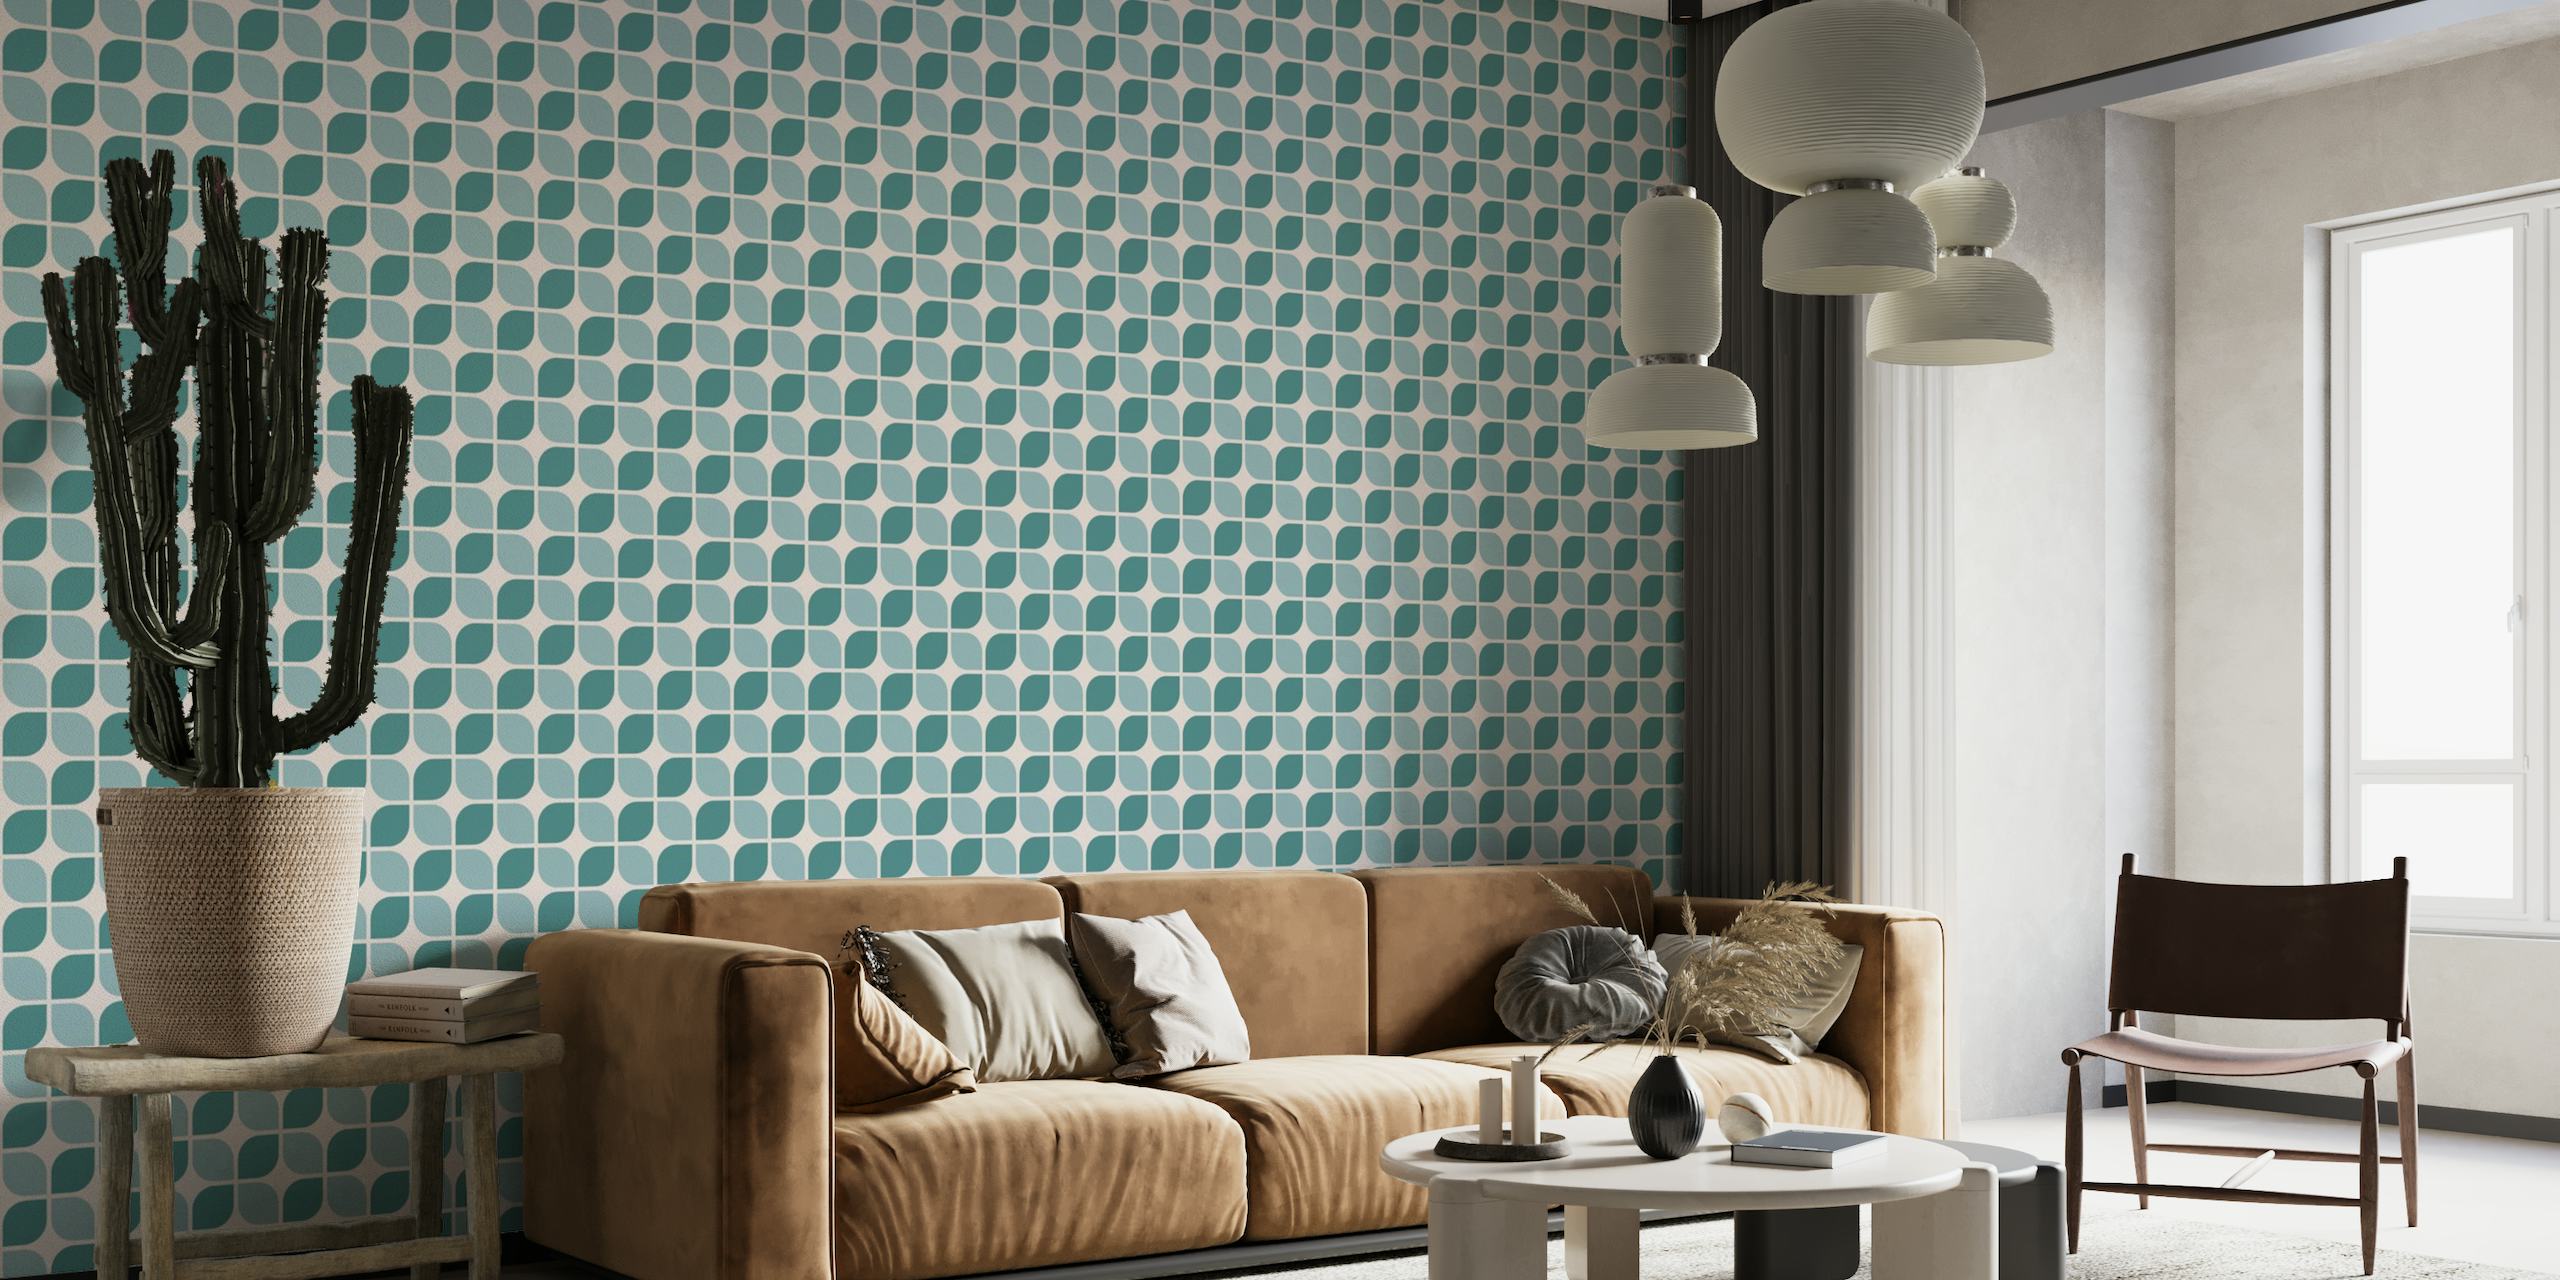 Retro Shapes Pattern Teal Turquoise wallpaper